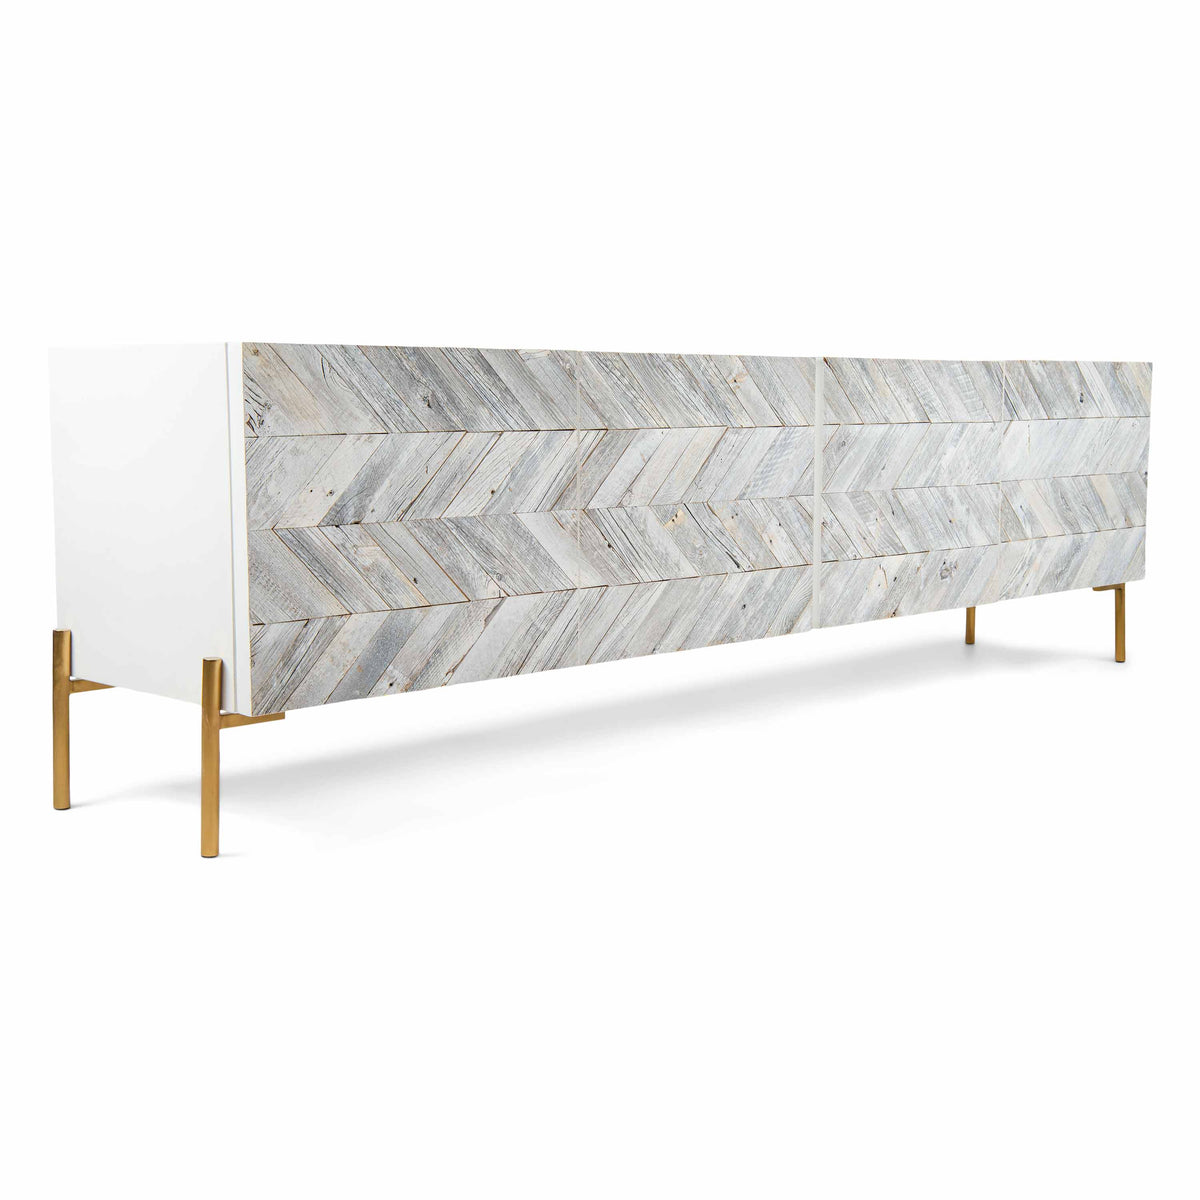 Mr. Smith Credenza in White Washed Recycled Wood